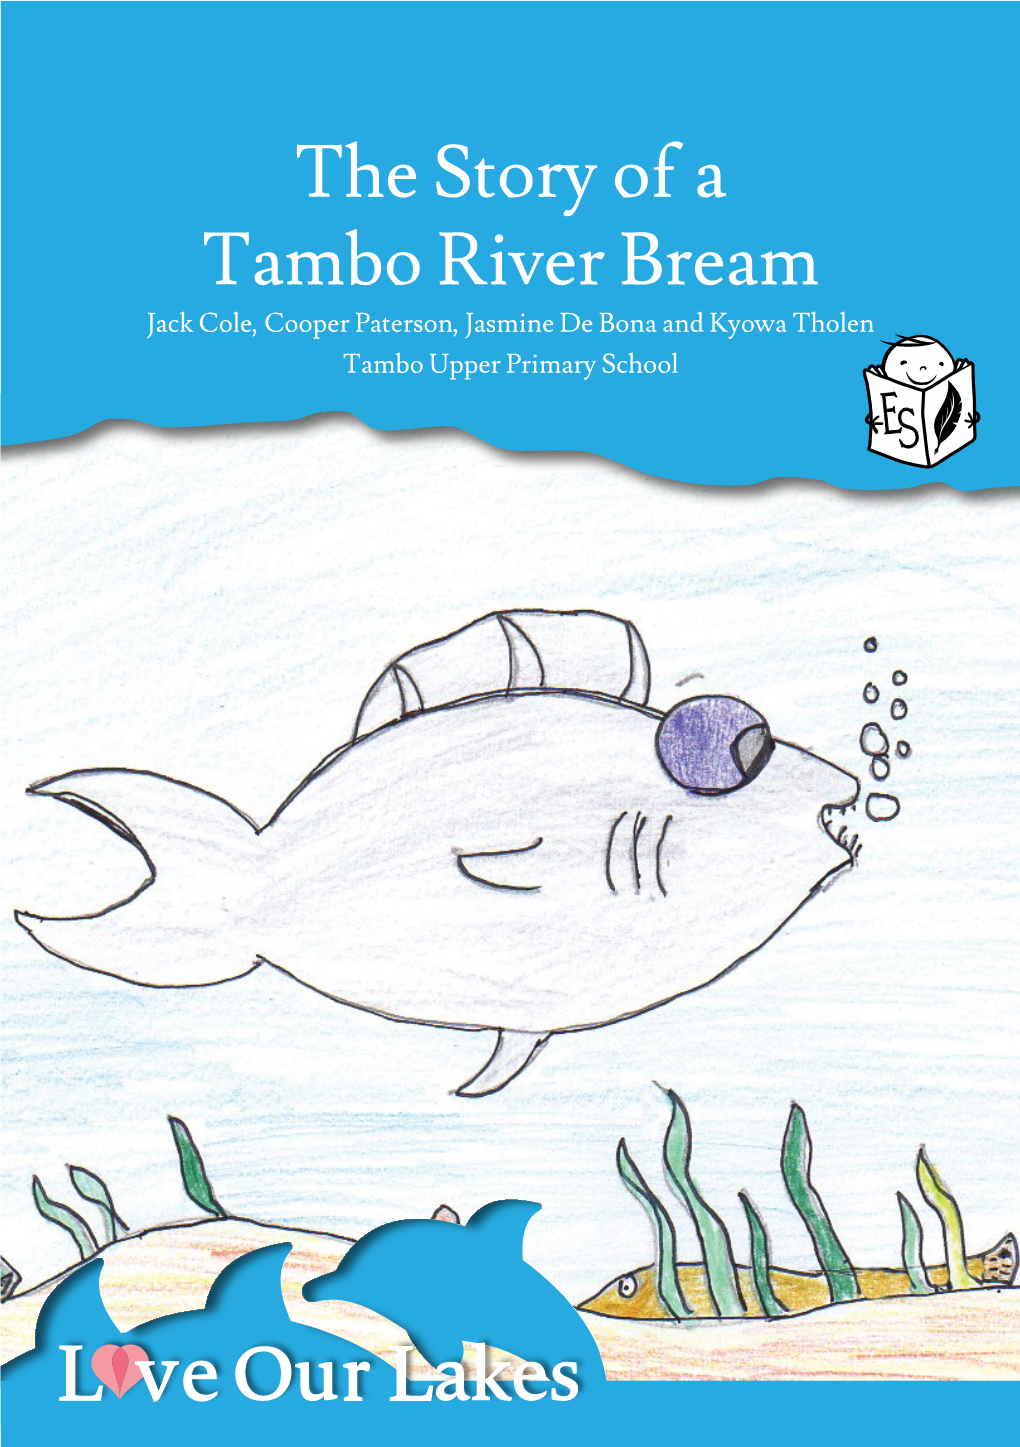 The Story of a Tambo River Bream